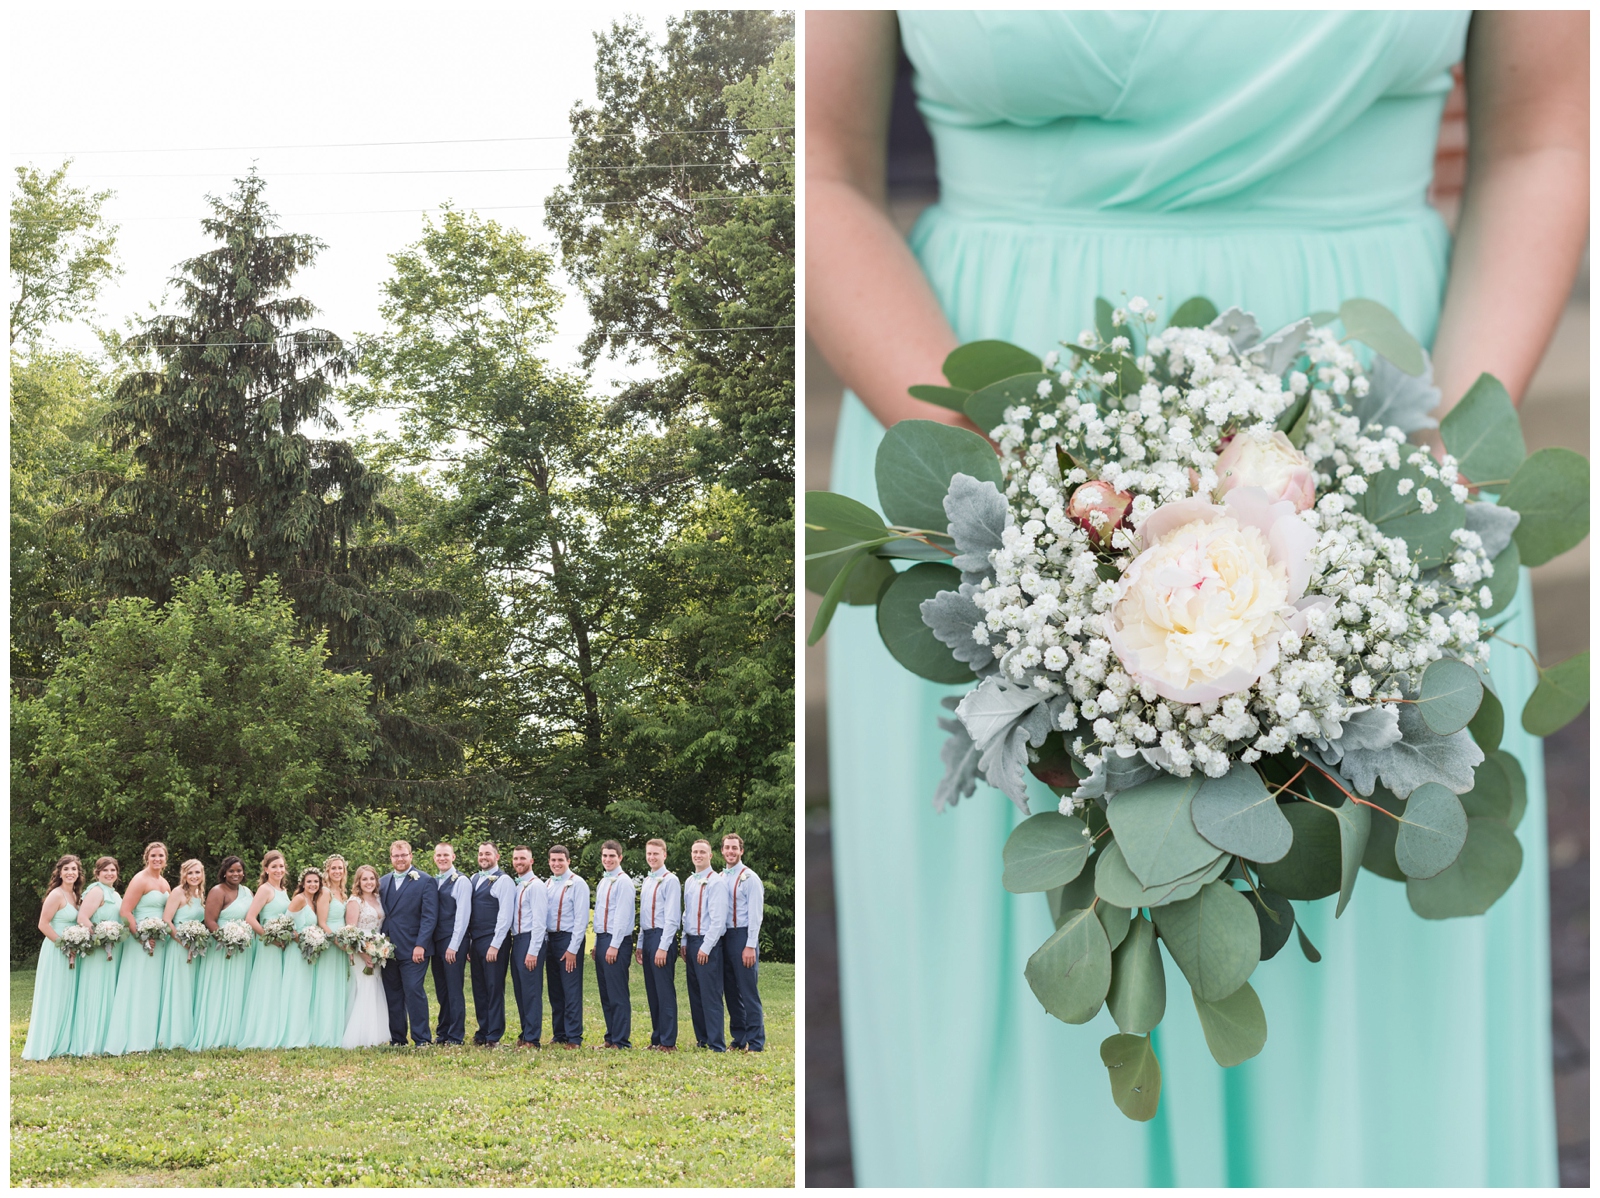 bridesmaids in mint gowns hold wedding bouquets with white flowers and baby's breath